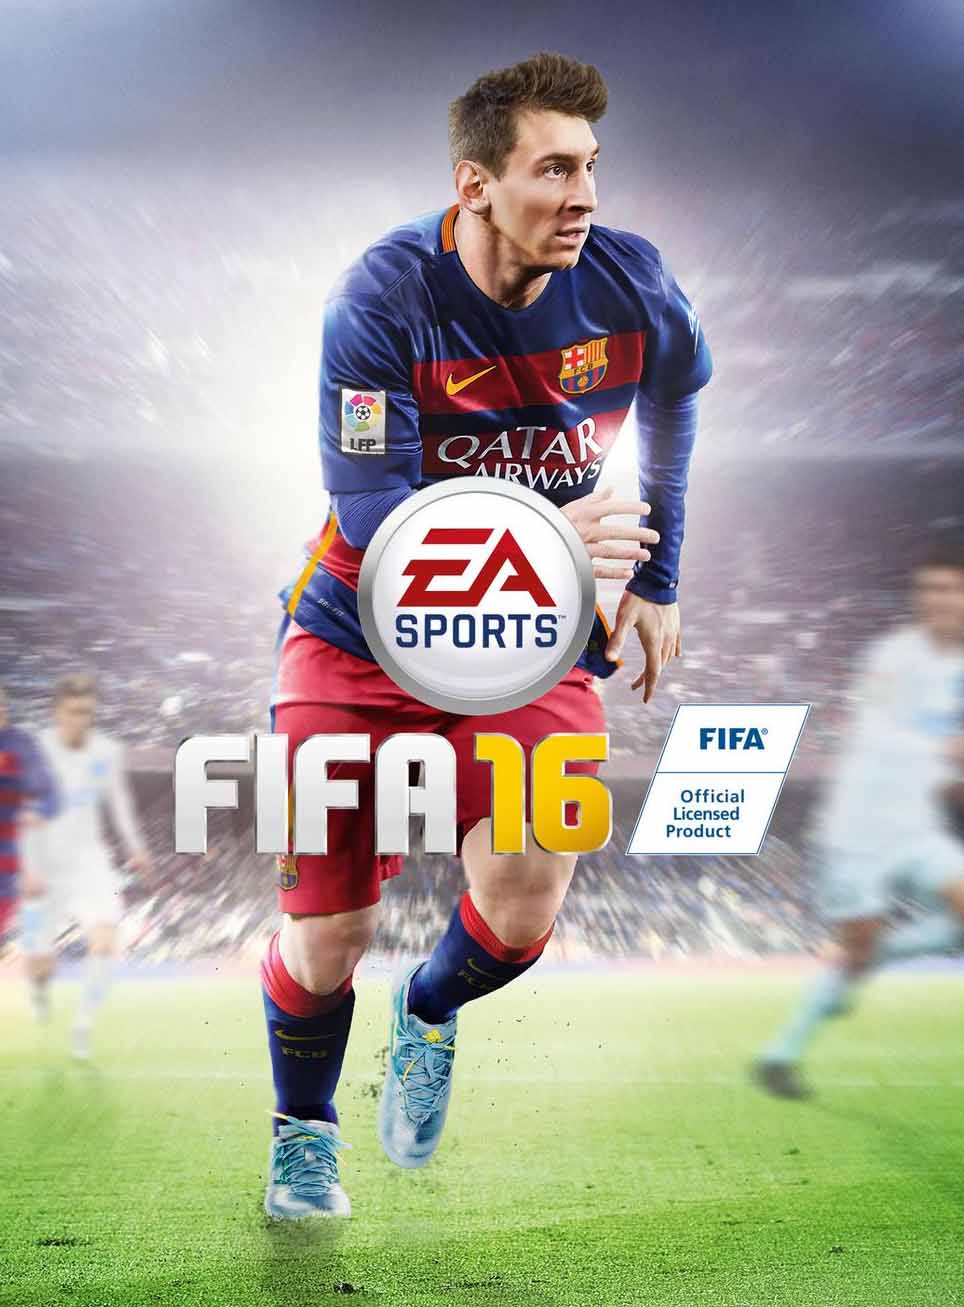 The Official Global FIFA 16 Cover